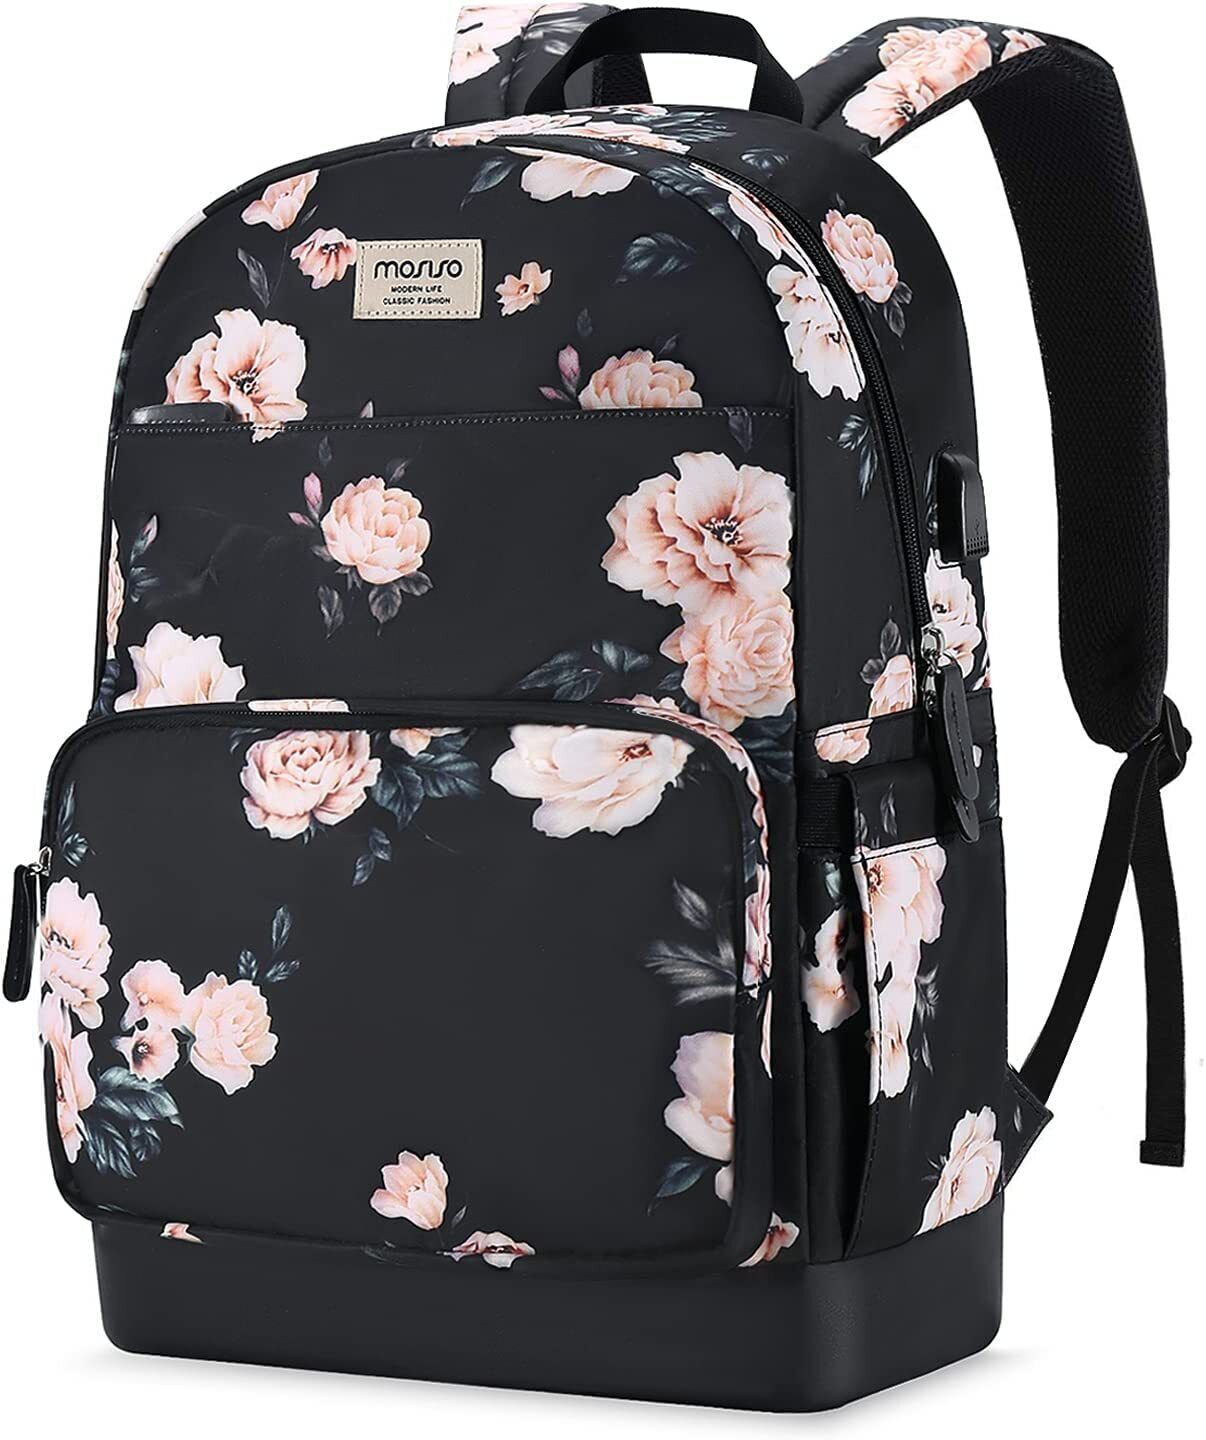 15.6-16 inch Laptop Backpack Bag for Women Girls Travel Business College School